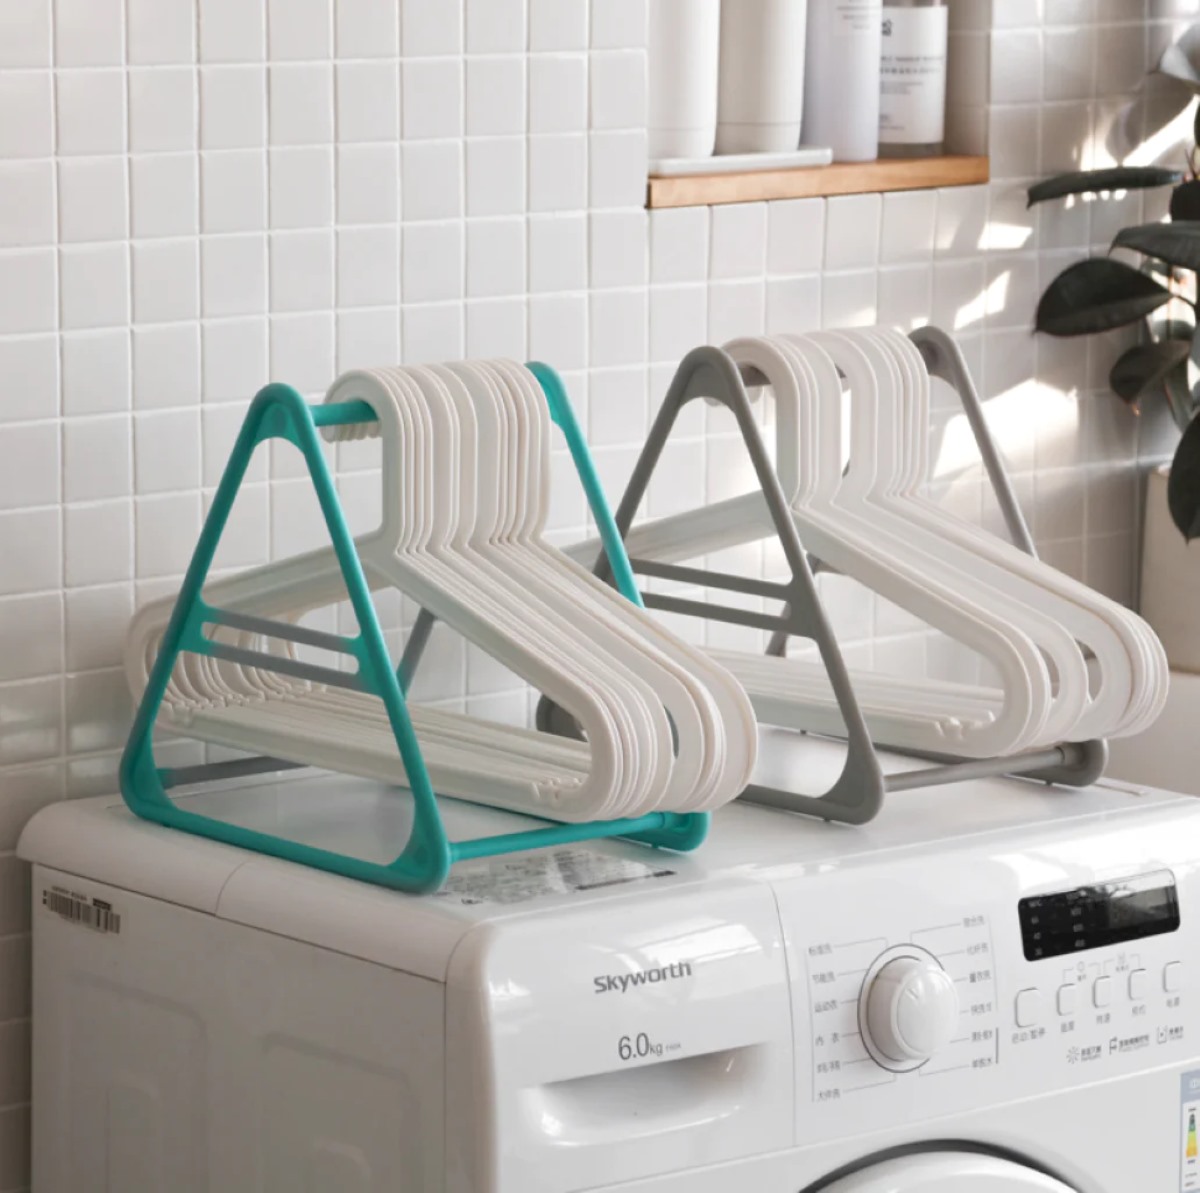 How To Organize Hangers In Laundry Room